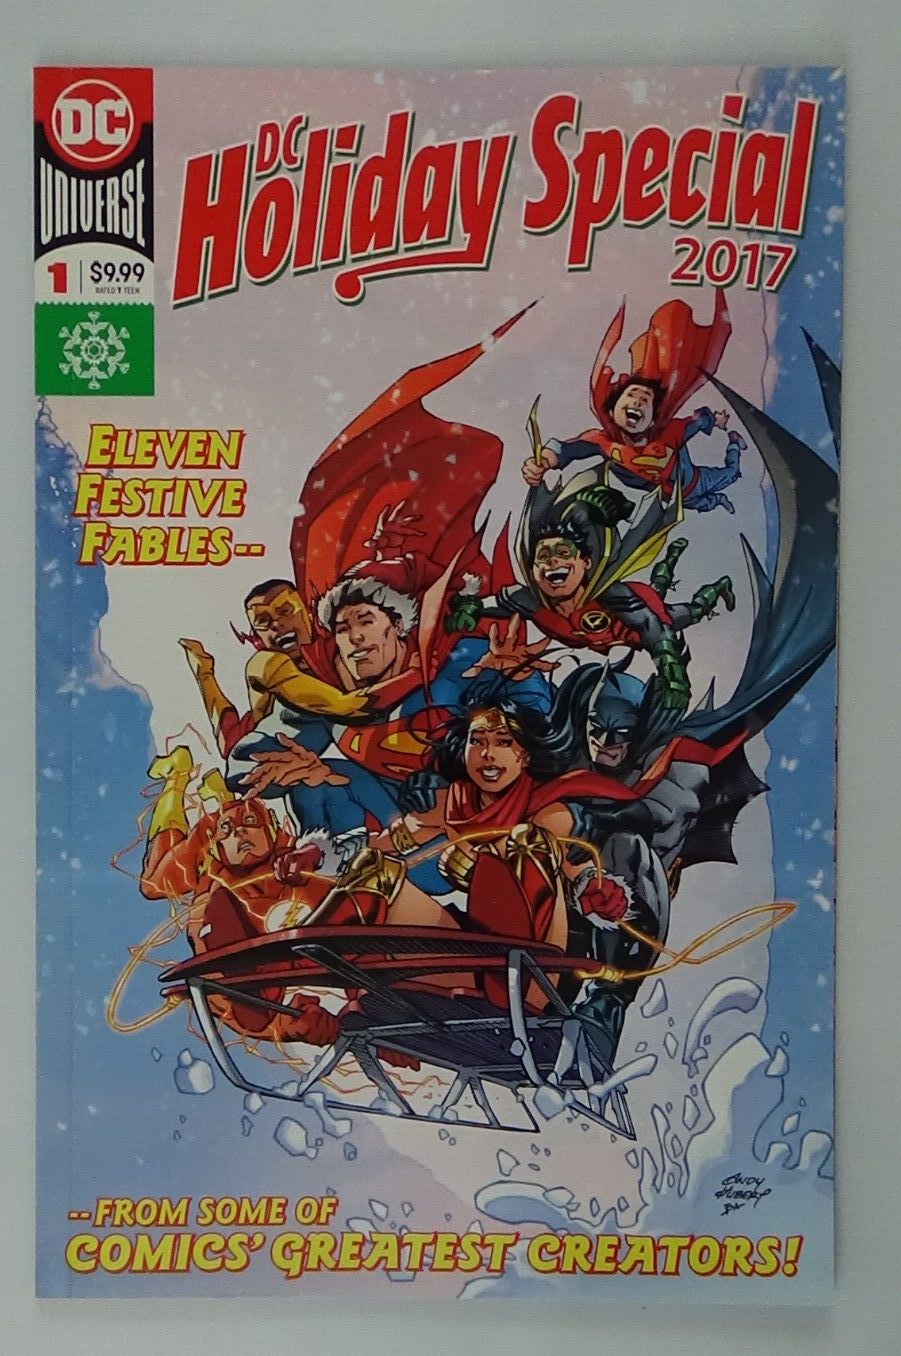 DC Holiday Special #1 2017 Paperback #02